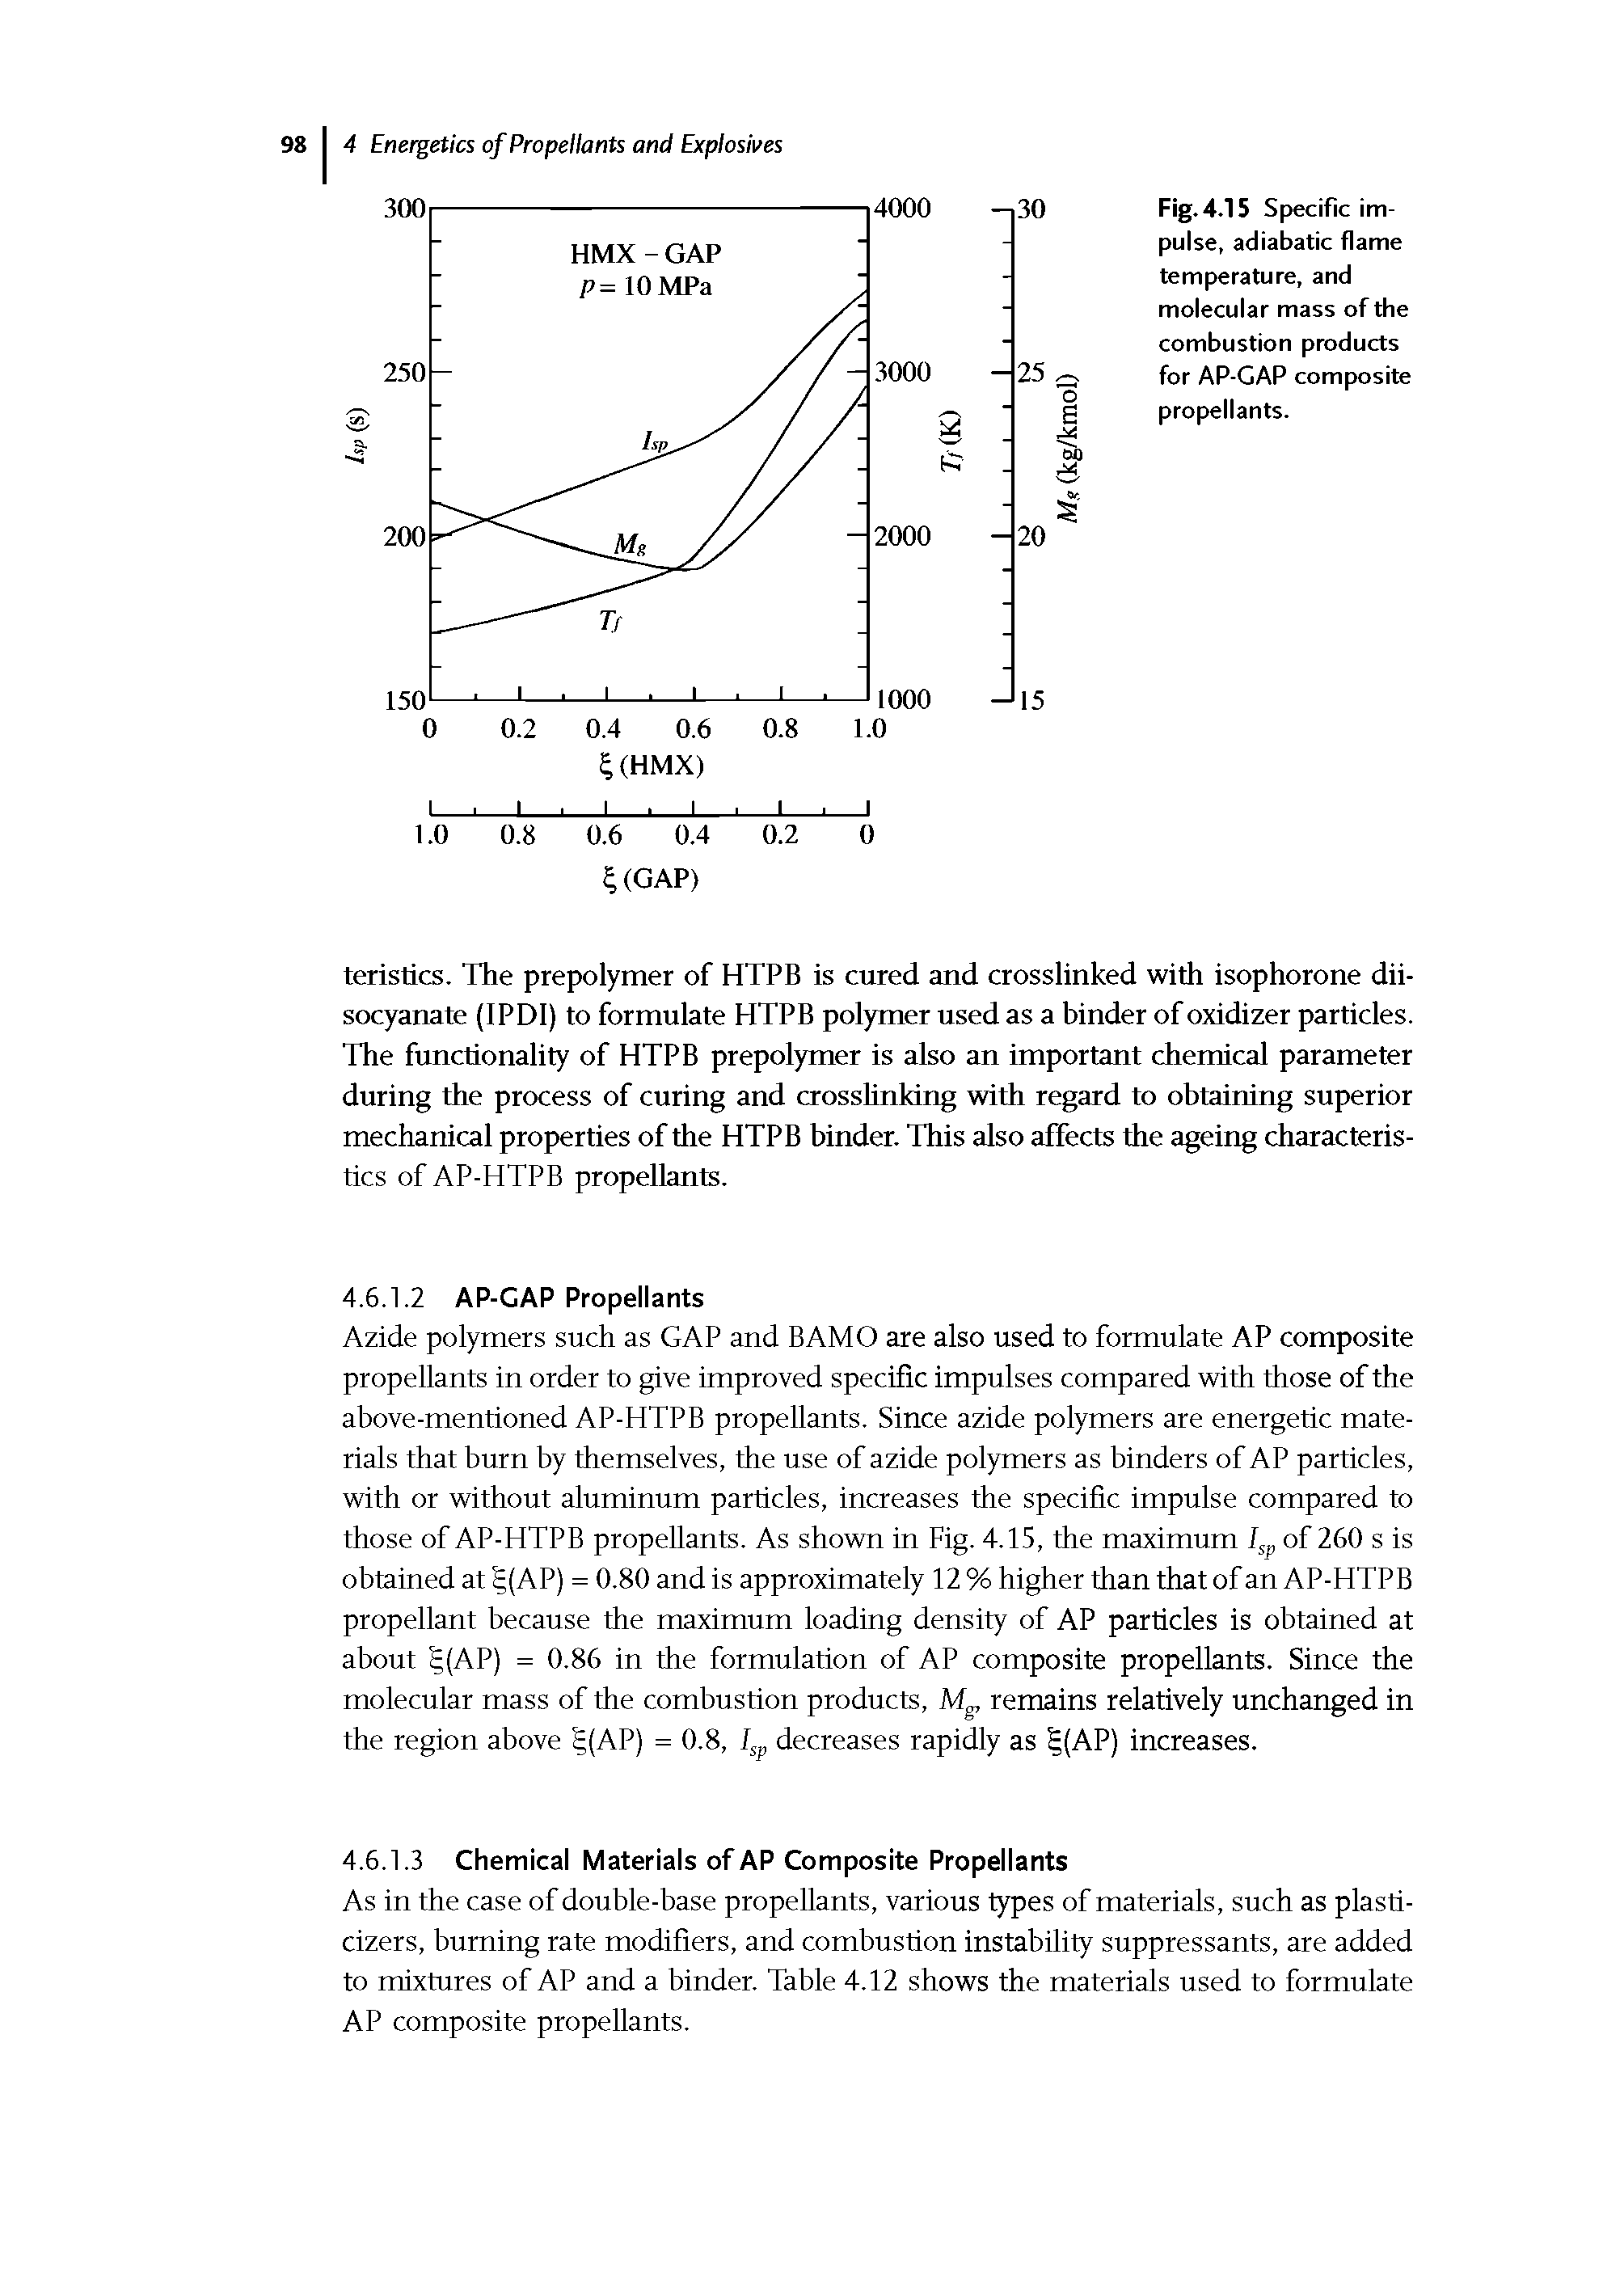 Fig. 4.15 Specific impulse, adiabatic flame temperature, and molecular mass of the combustion products for AP-GAP composite propellants.